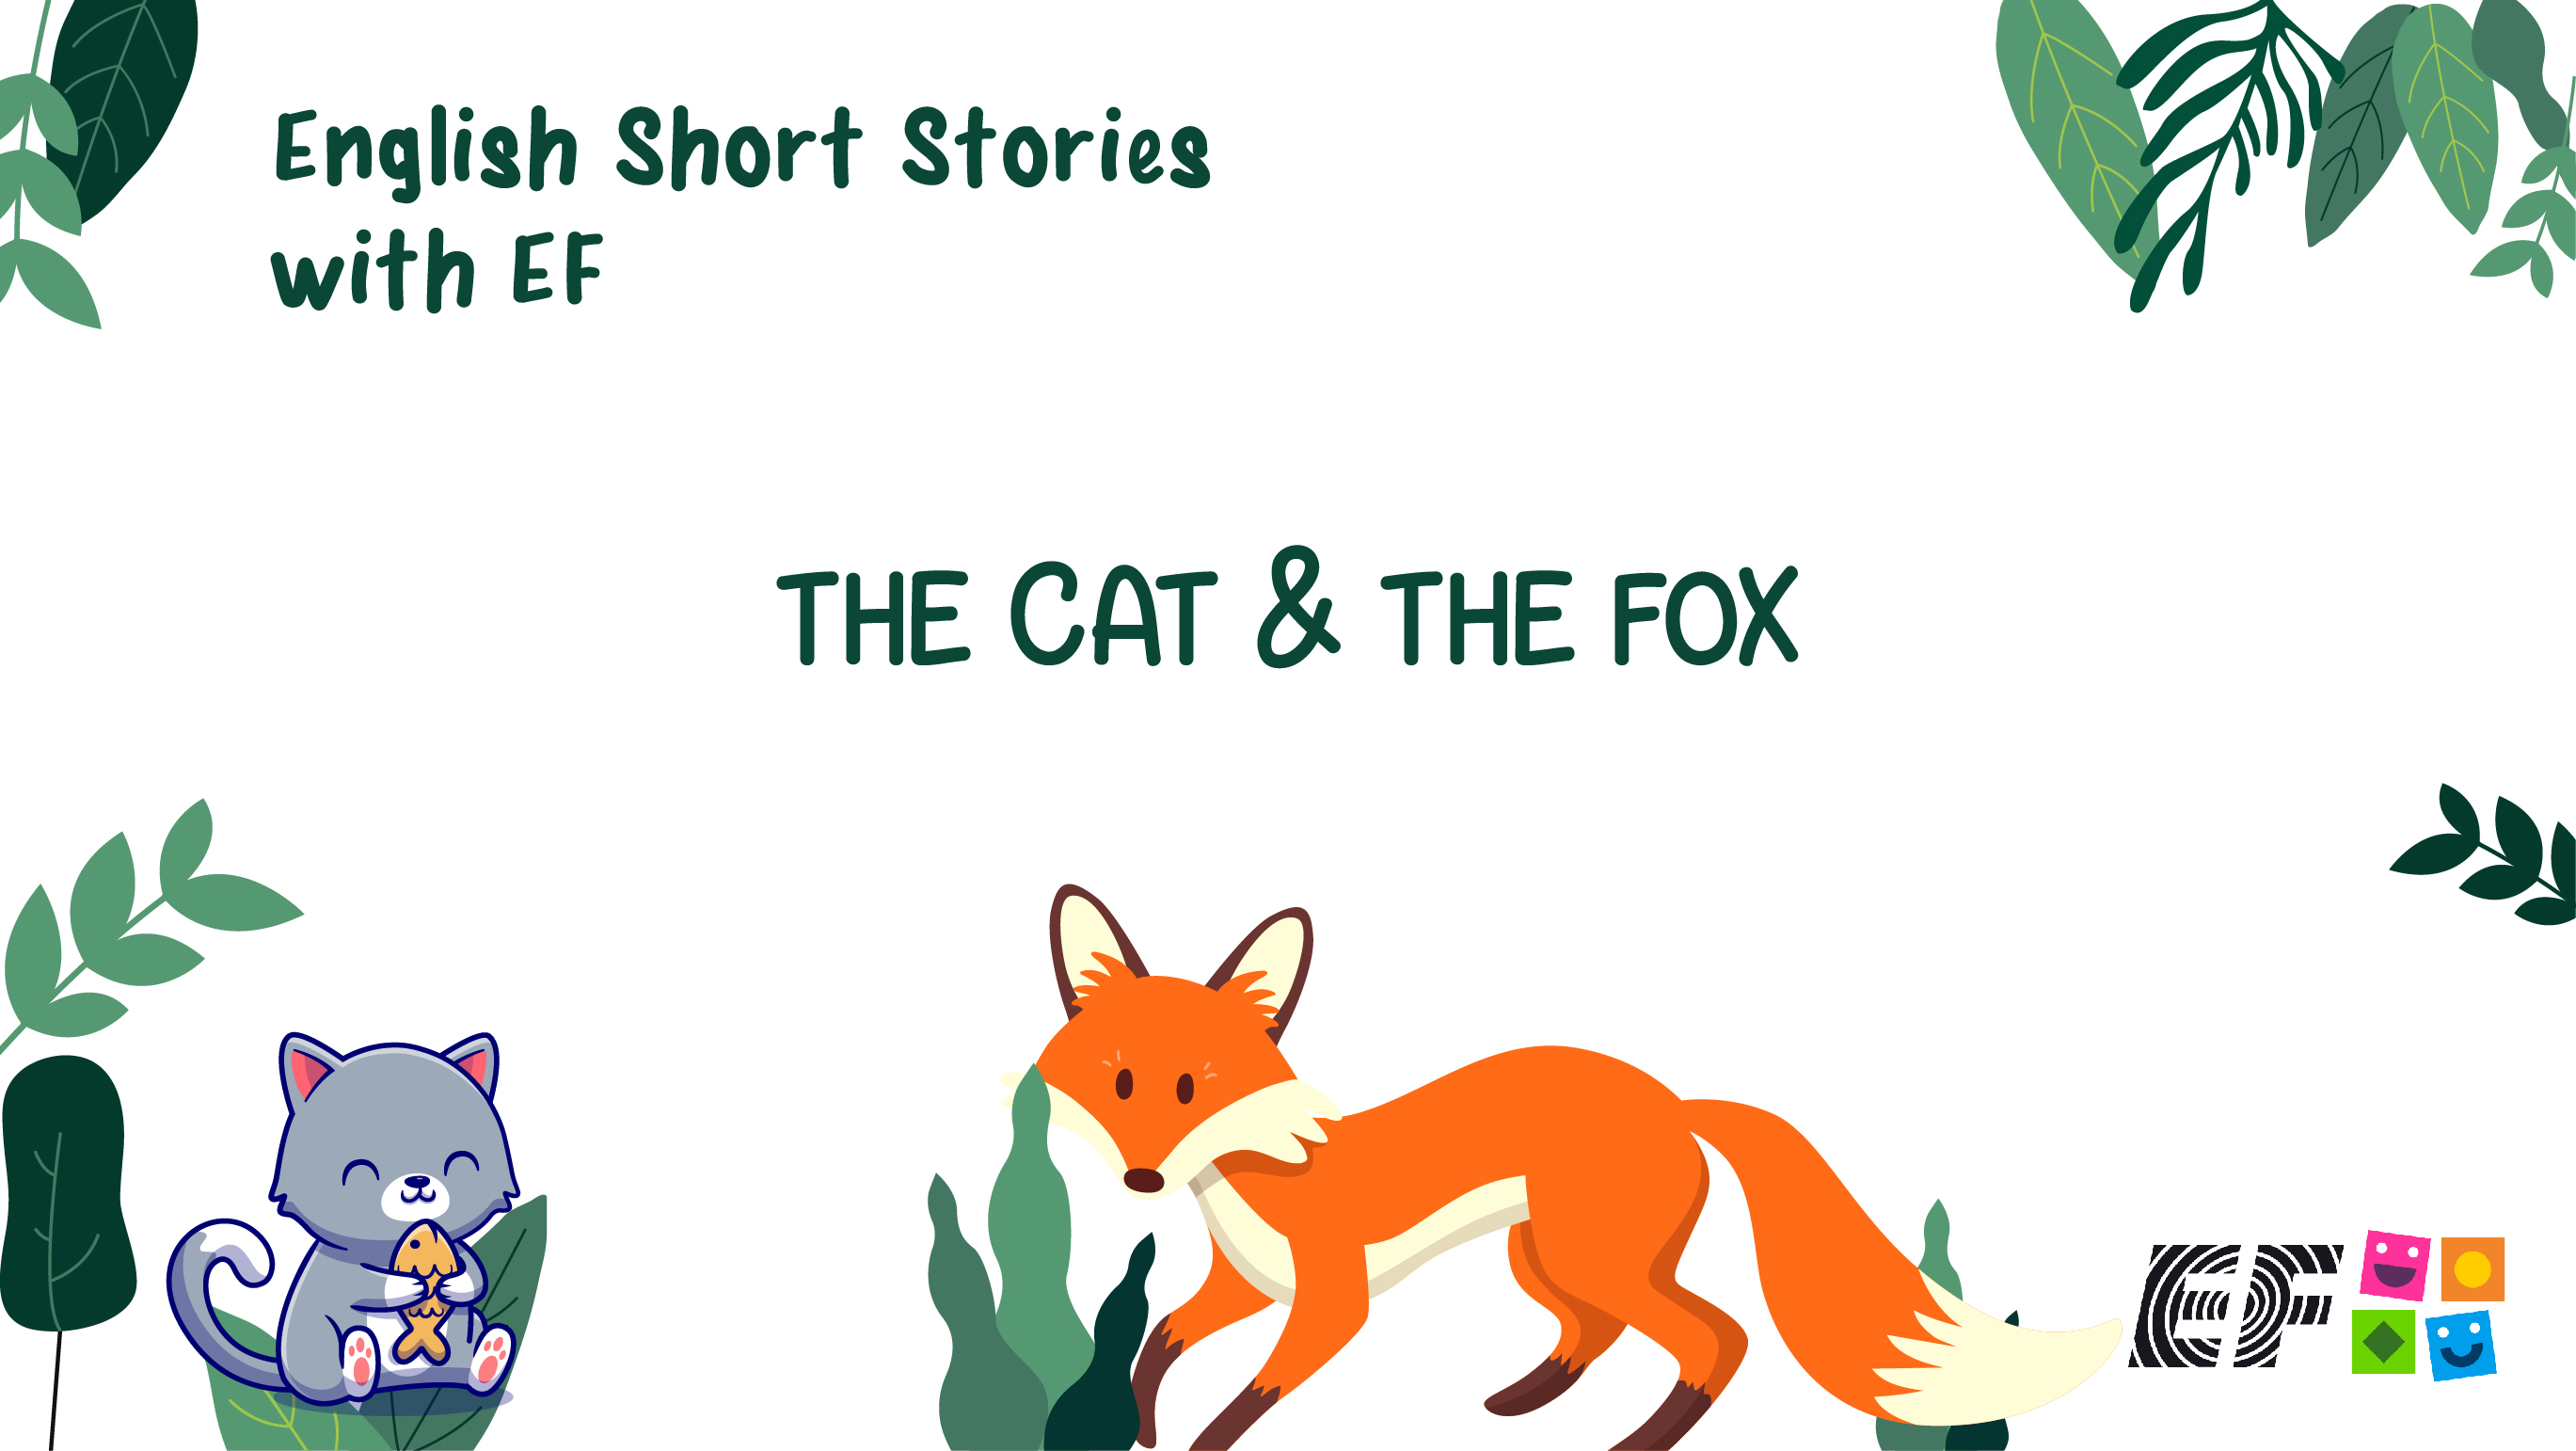 English Short Stories - The Cat and The Fox